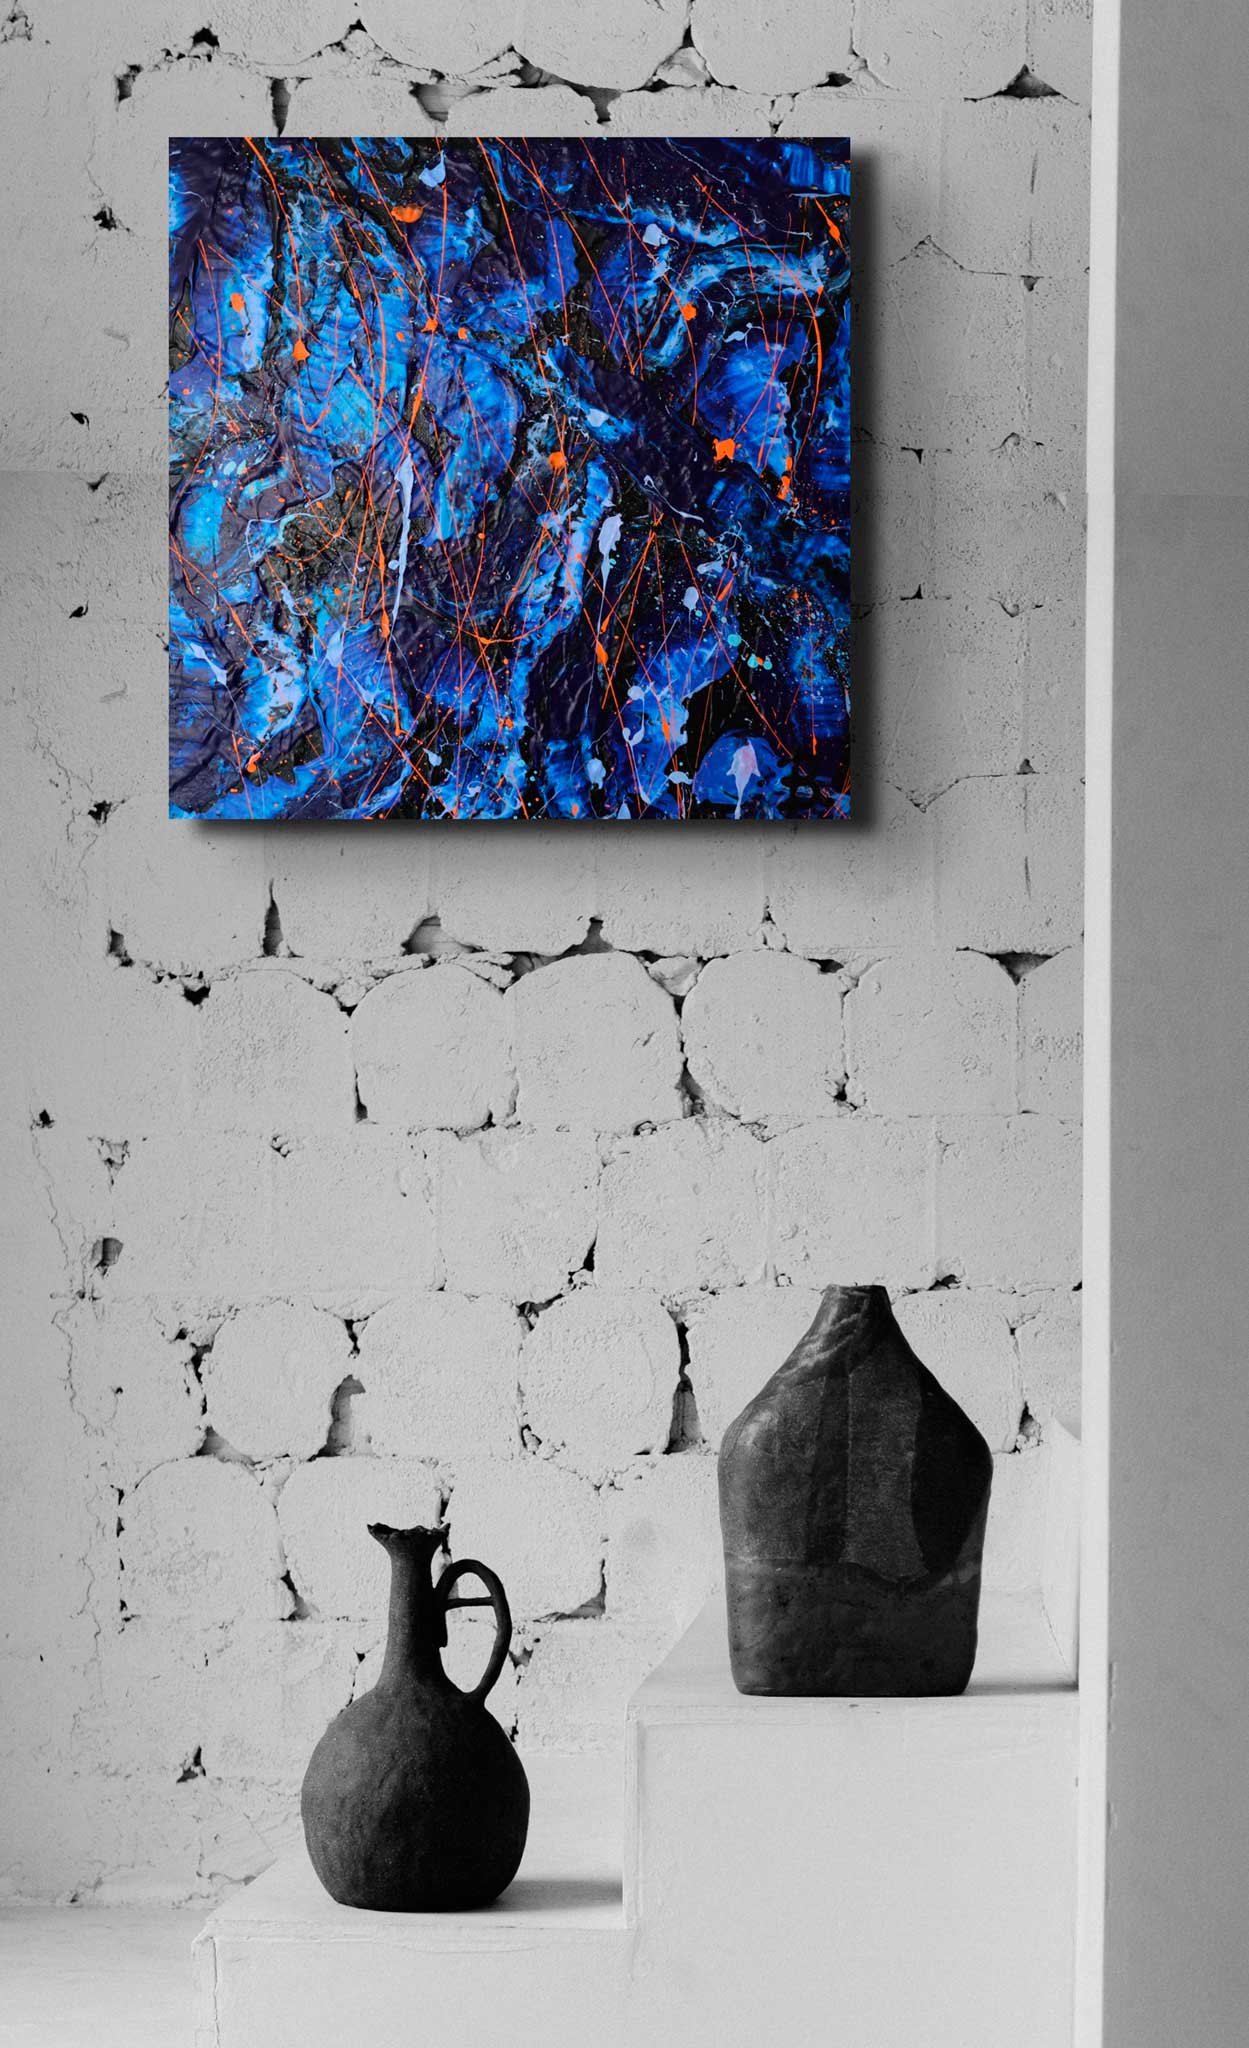 'Enigma' a commissioned abstract painting by Bridget Bradley. Heavy texture abstract on canvas seen hanging on light brick wall with black vases below on stairs.